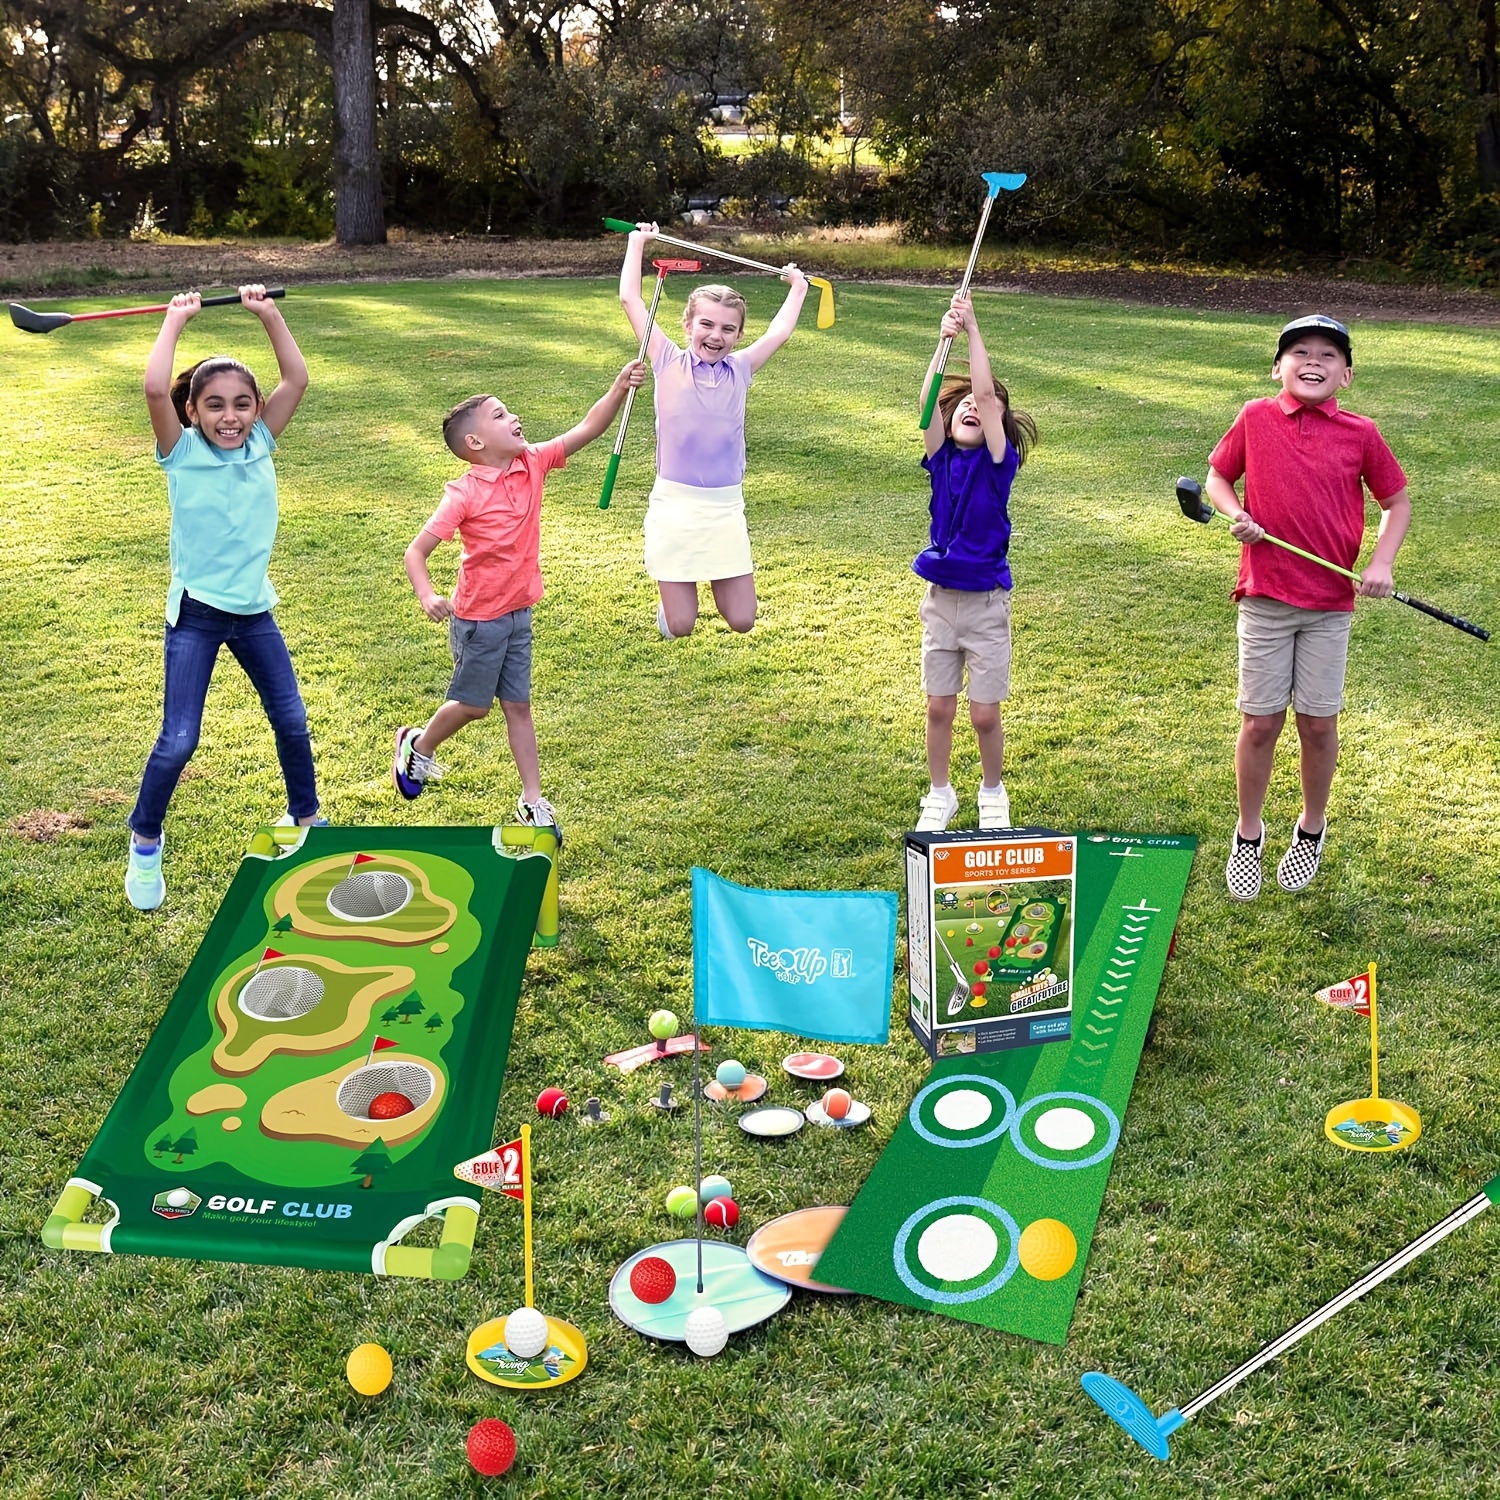 

2-in-1 Kids Golf Club Set And Bean Bag Toss Game, Toddler Golf Set- Mini Golf And Corn Hole Game For Kids Outdoor Toys- Ideal Gift For 2, 3, 4, 5, 6 Year Old Boys And Girls